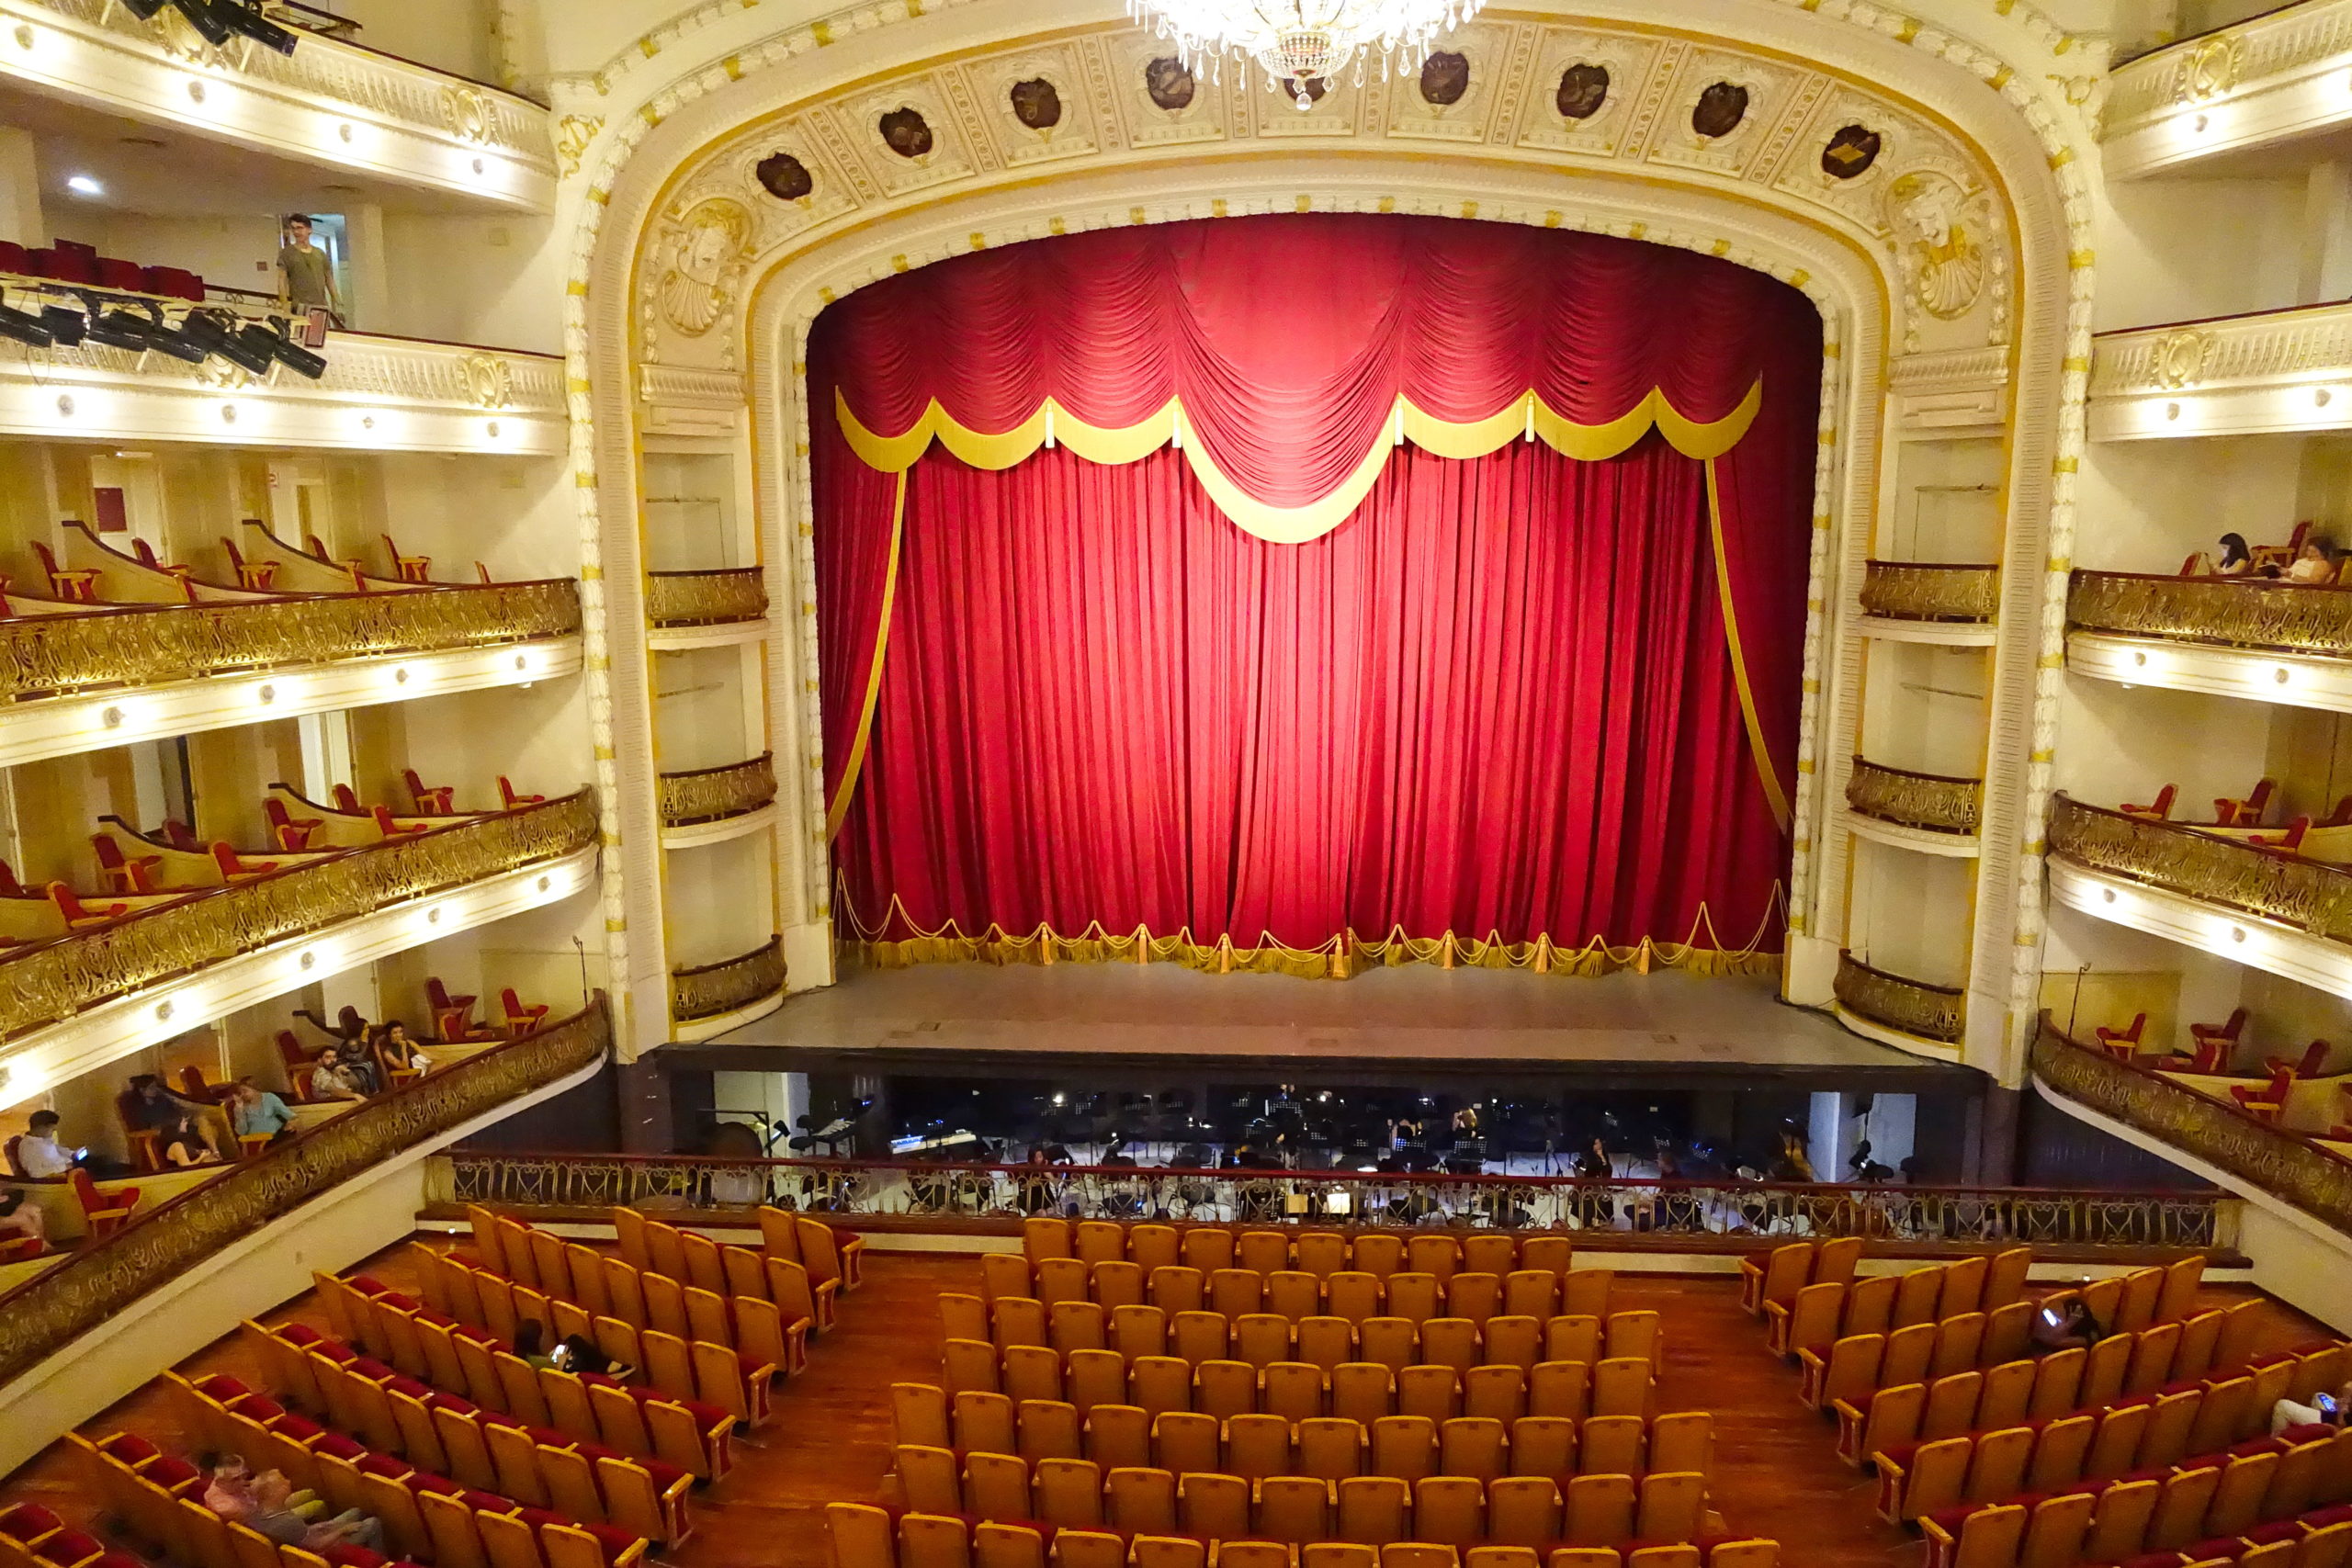 Gran Teatro de La Habana, soon to be filled with dancers, singers, musicians, and patrons of the arts.